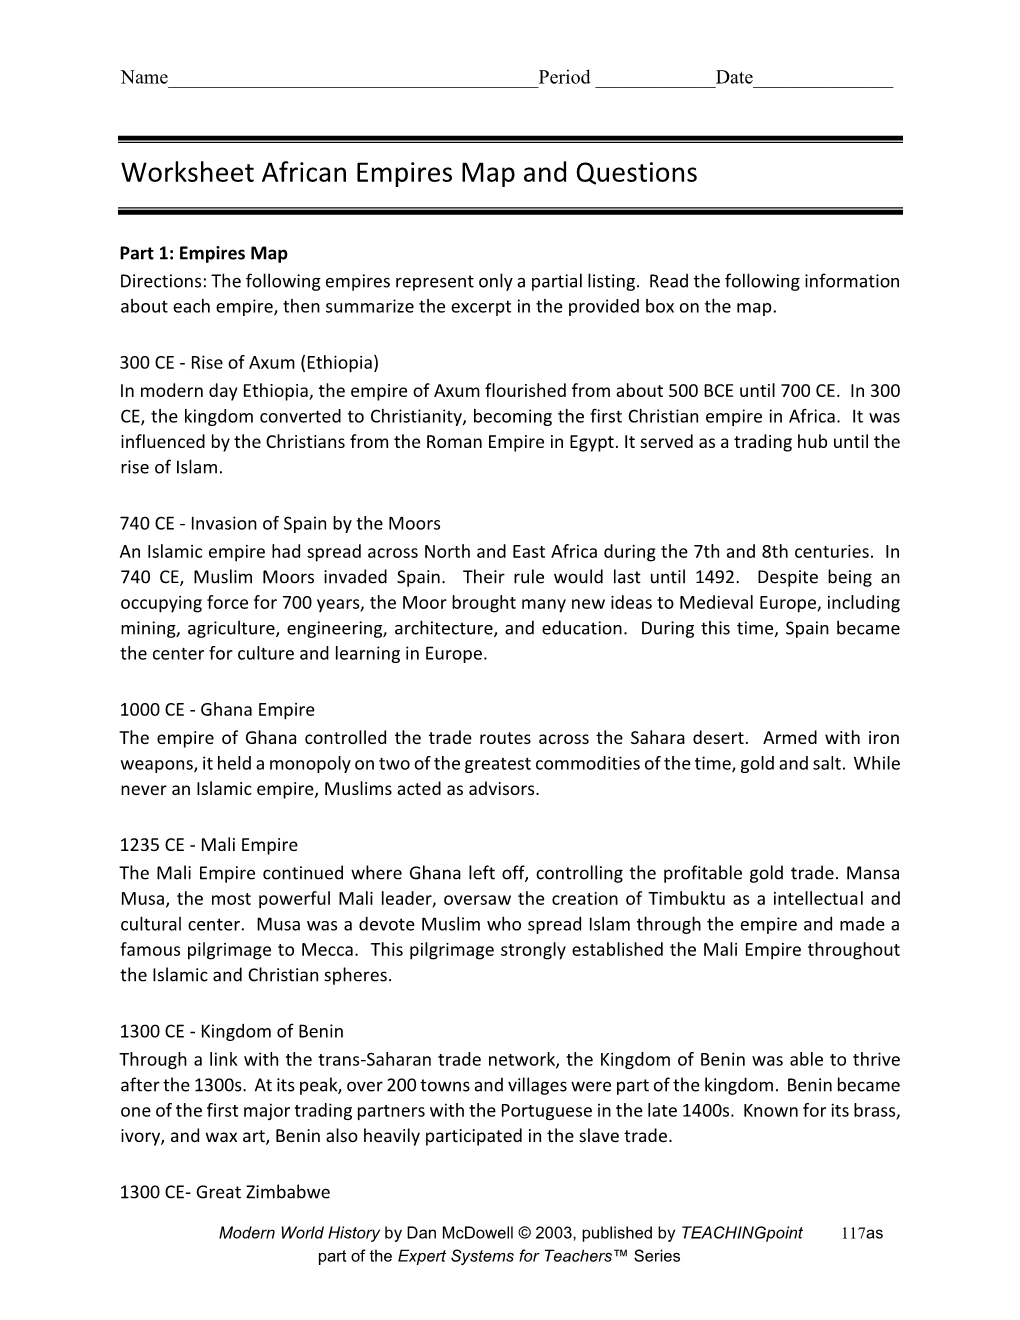 Worksheet African Empires Map and Questions